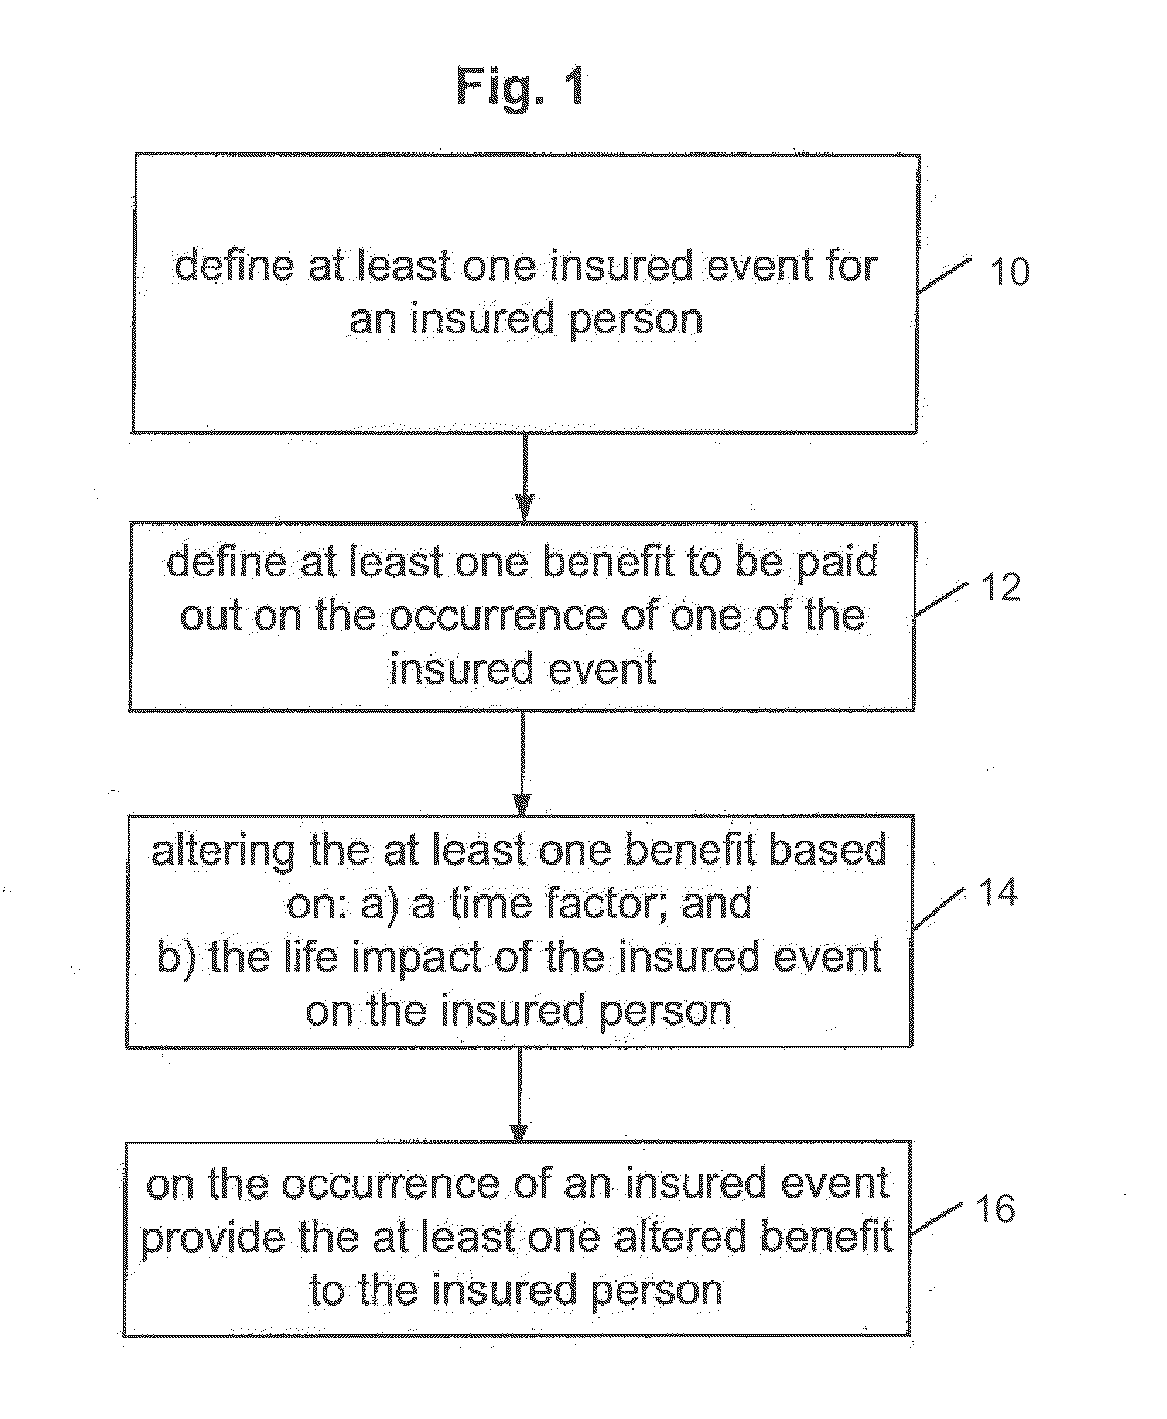 System and method of managing an insurance scheme